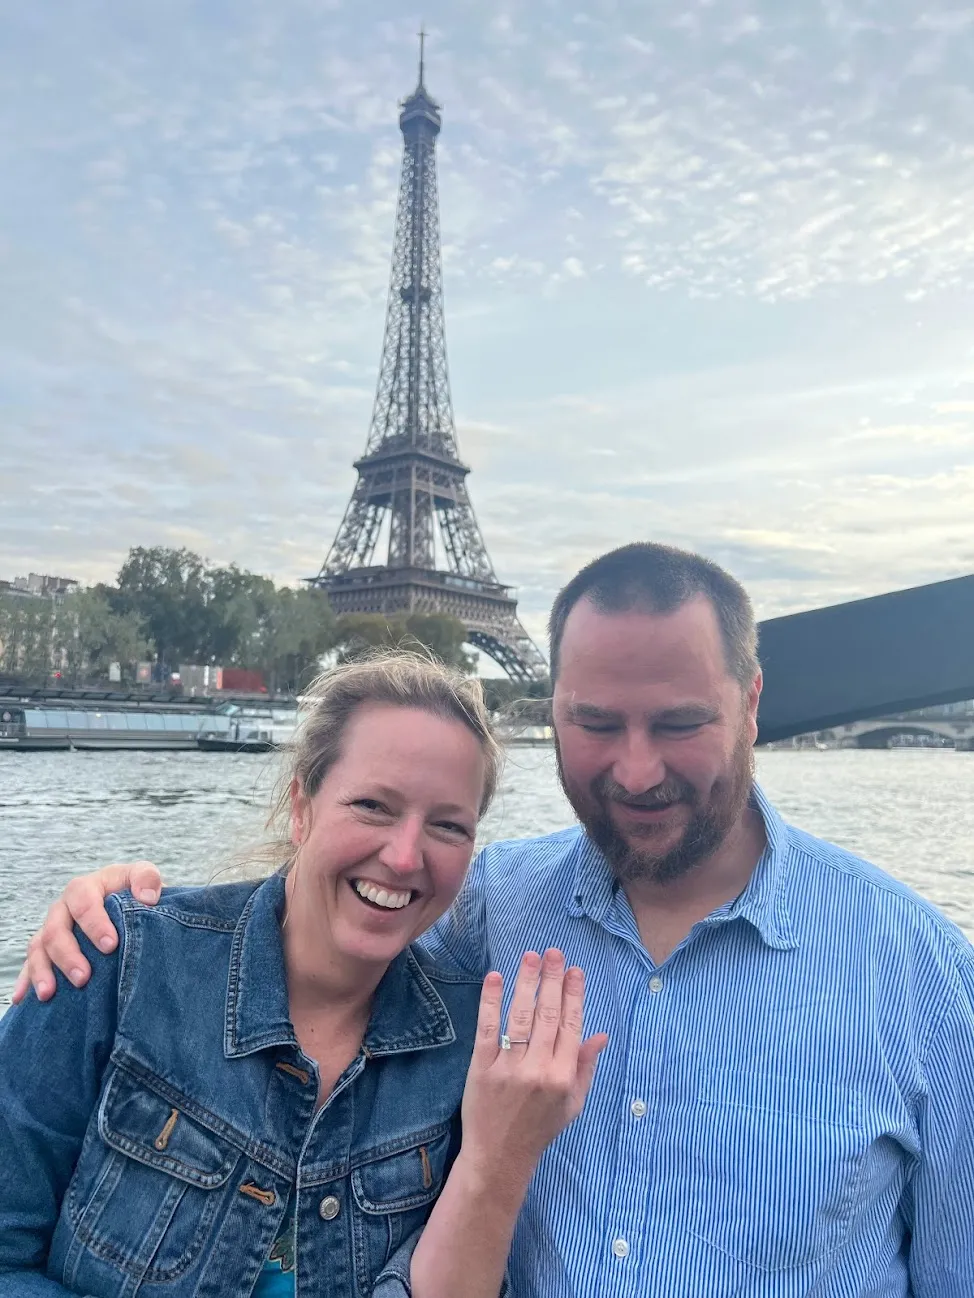 Robin and I in front of the Eiffel Tower with Robin smiling and showing off her new engagement ring